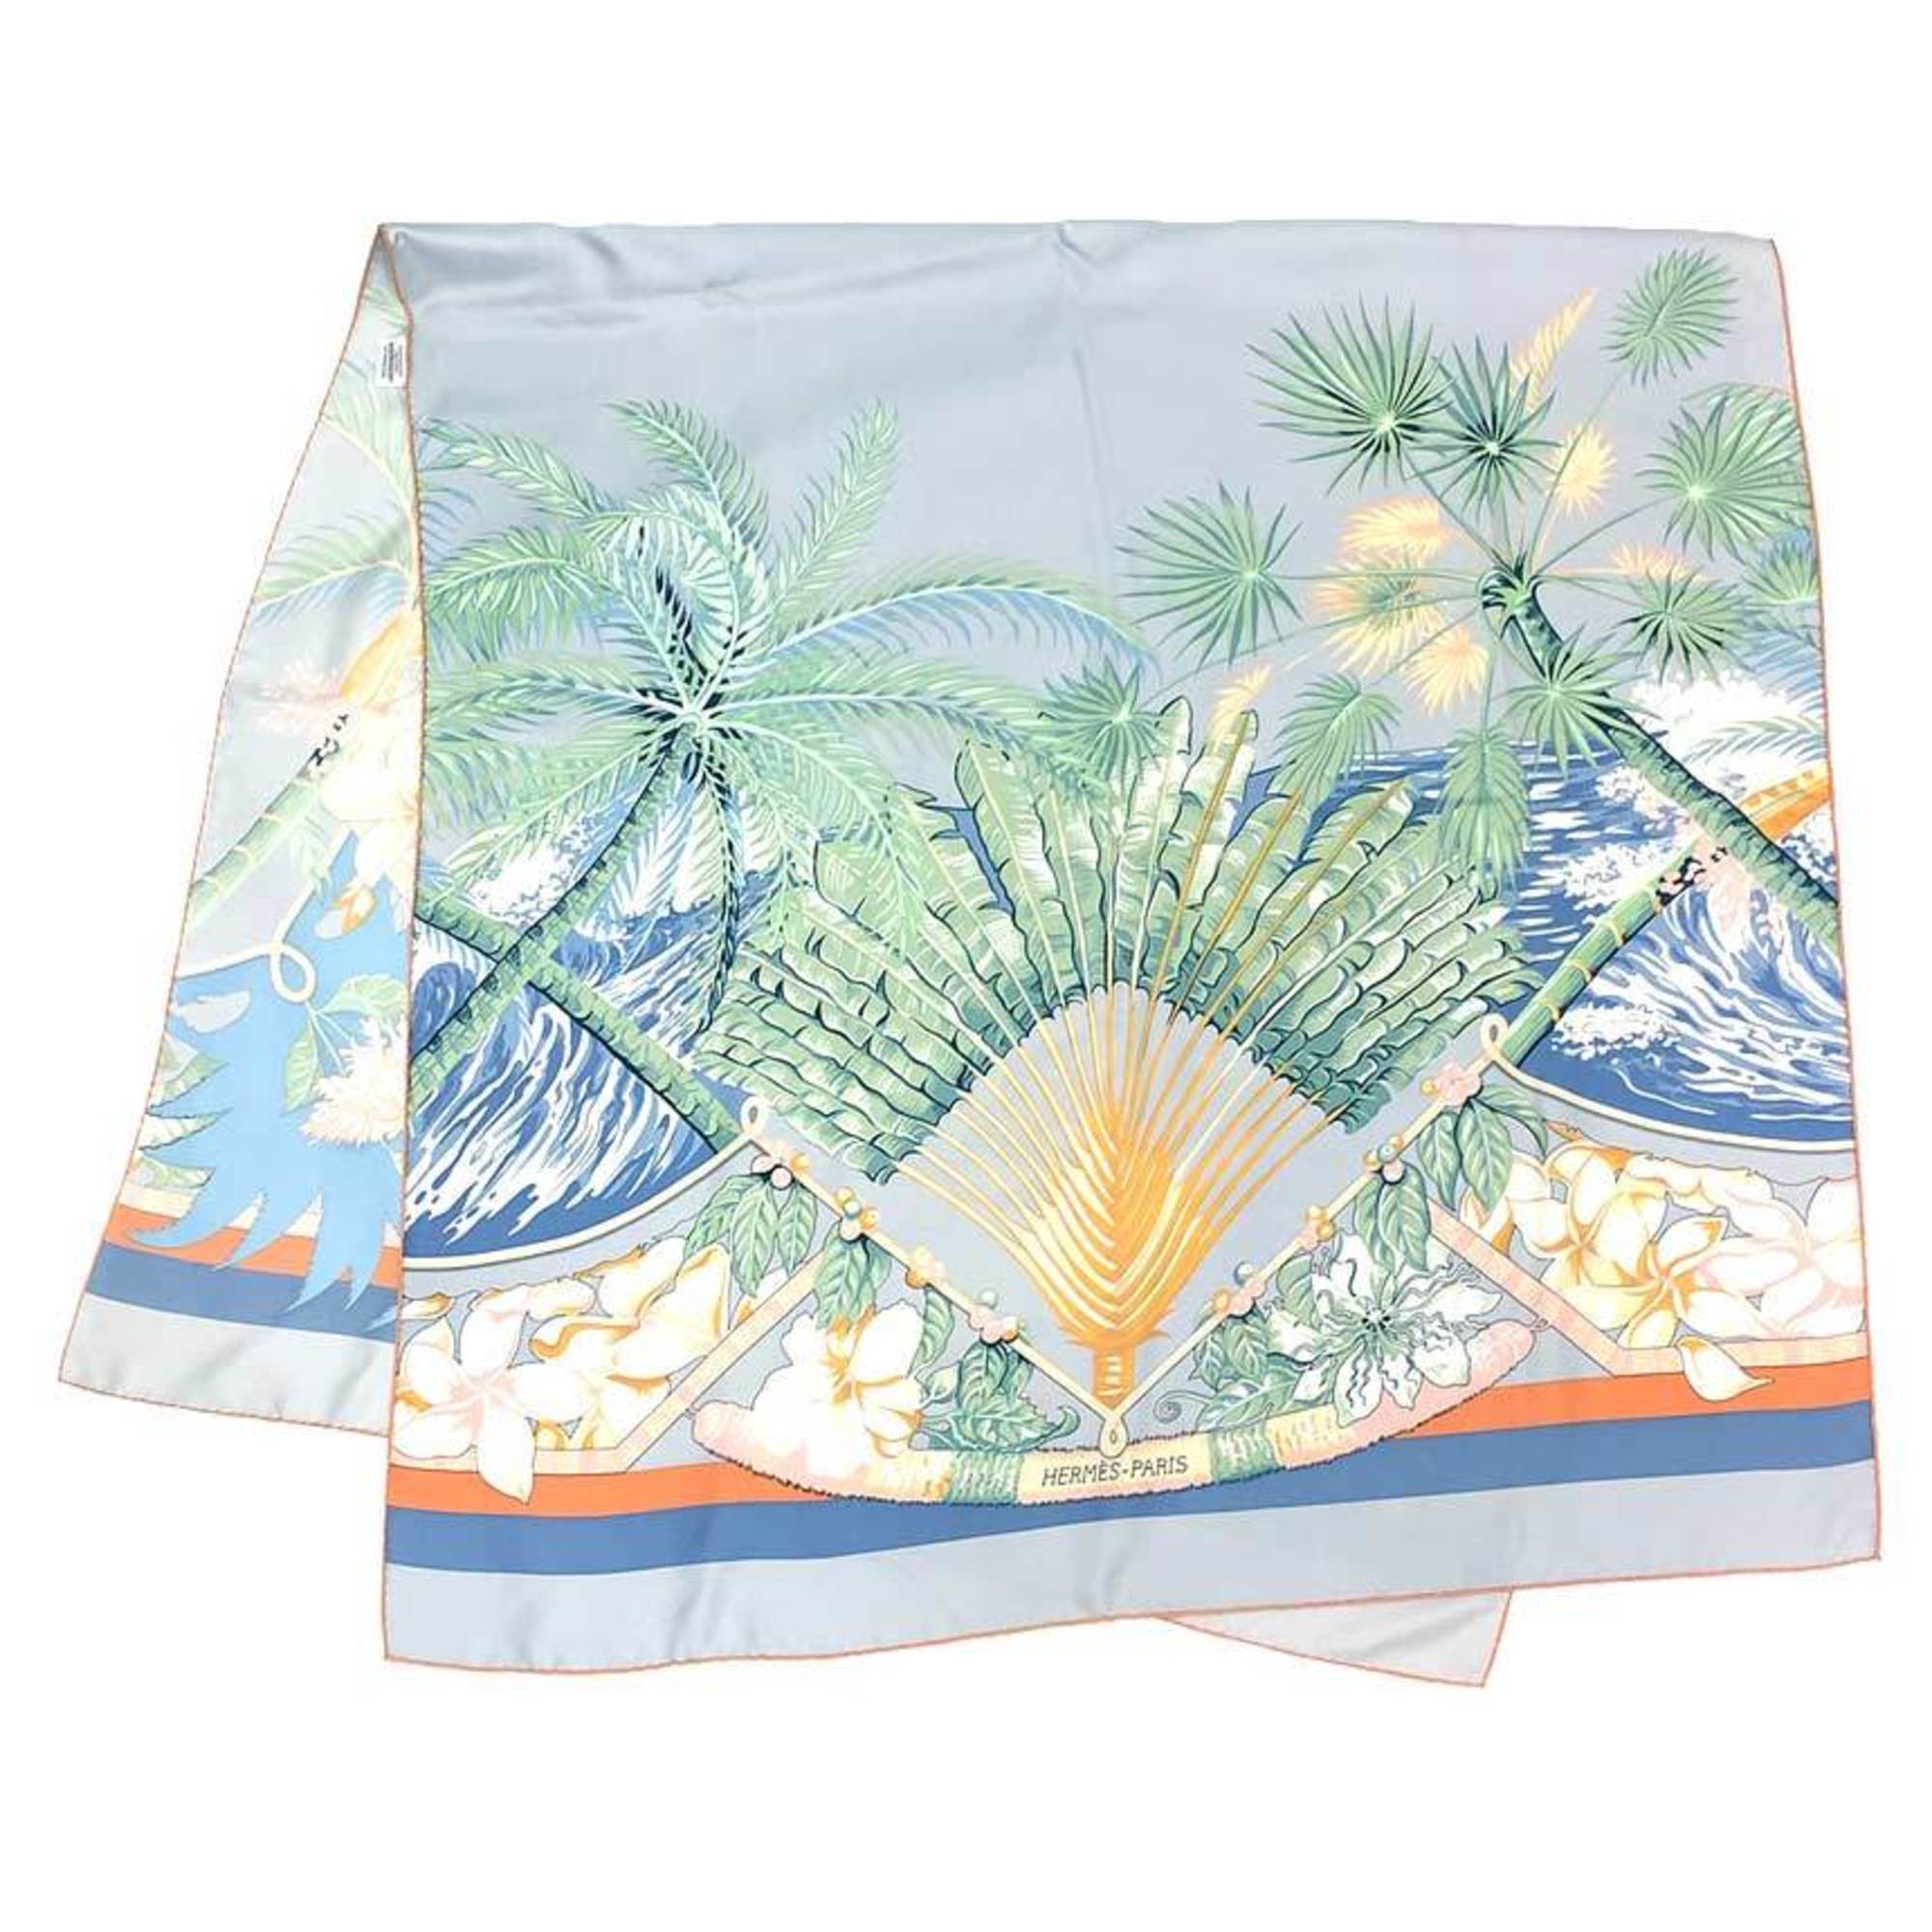 HERMES Hermes scarf muffler stole shawl palm tree large size 100% silk multi-cover aq9859